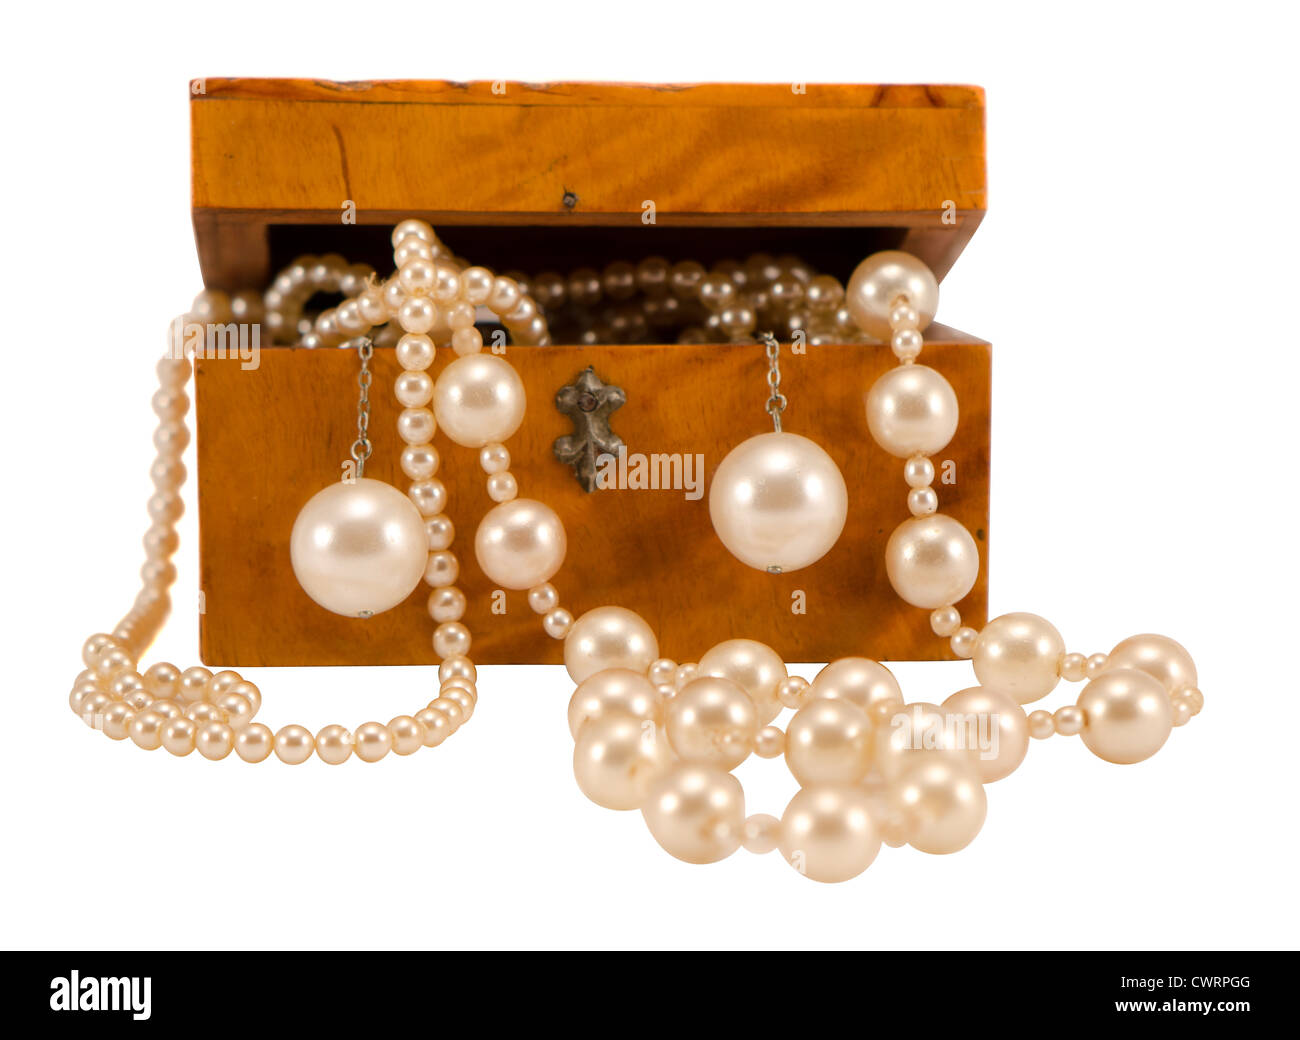 Pearl jewelry beads necklace earring in retro wooden box isolated on white Stock Photo